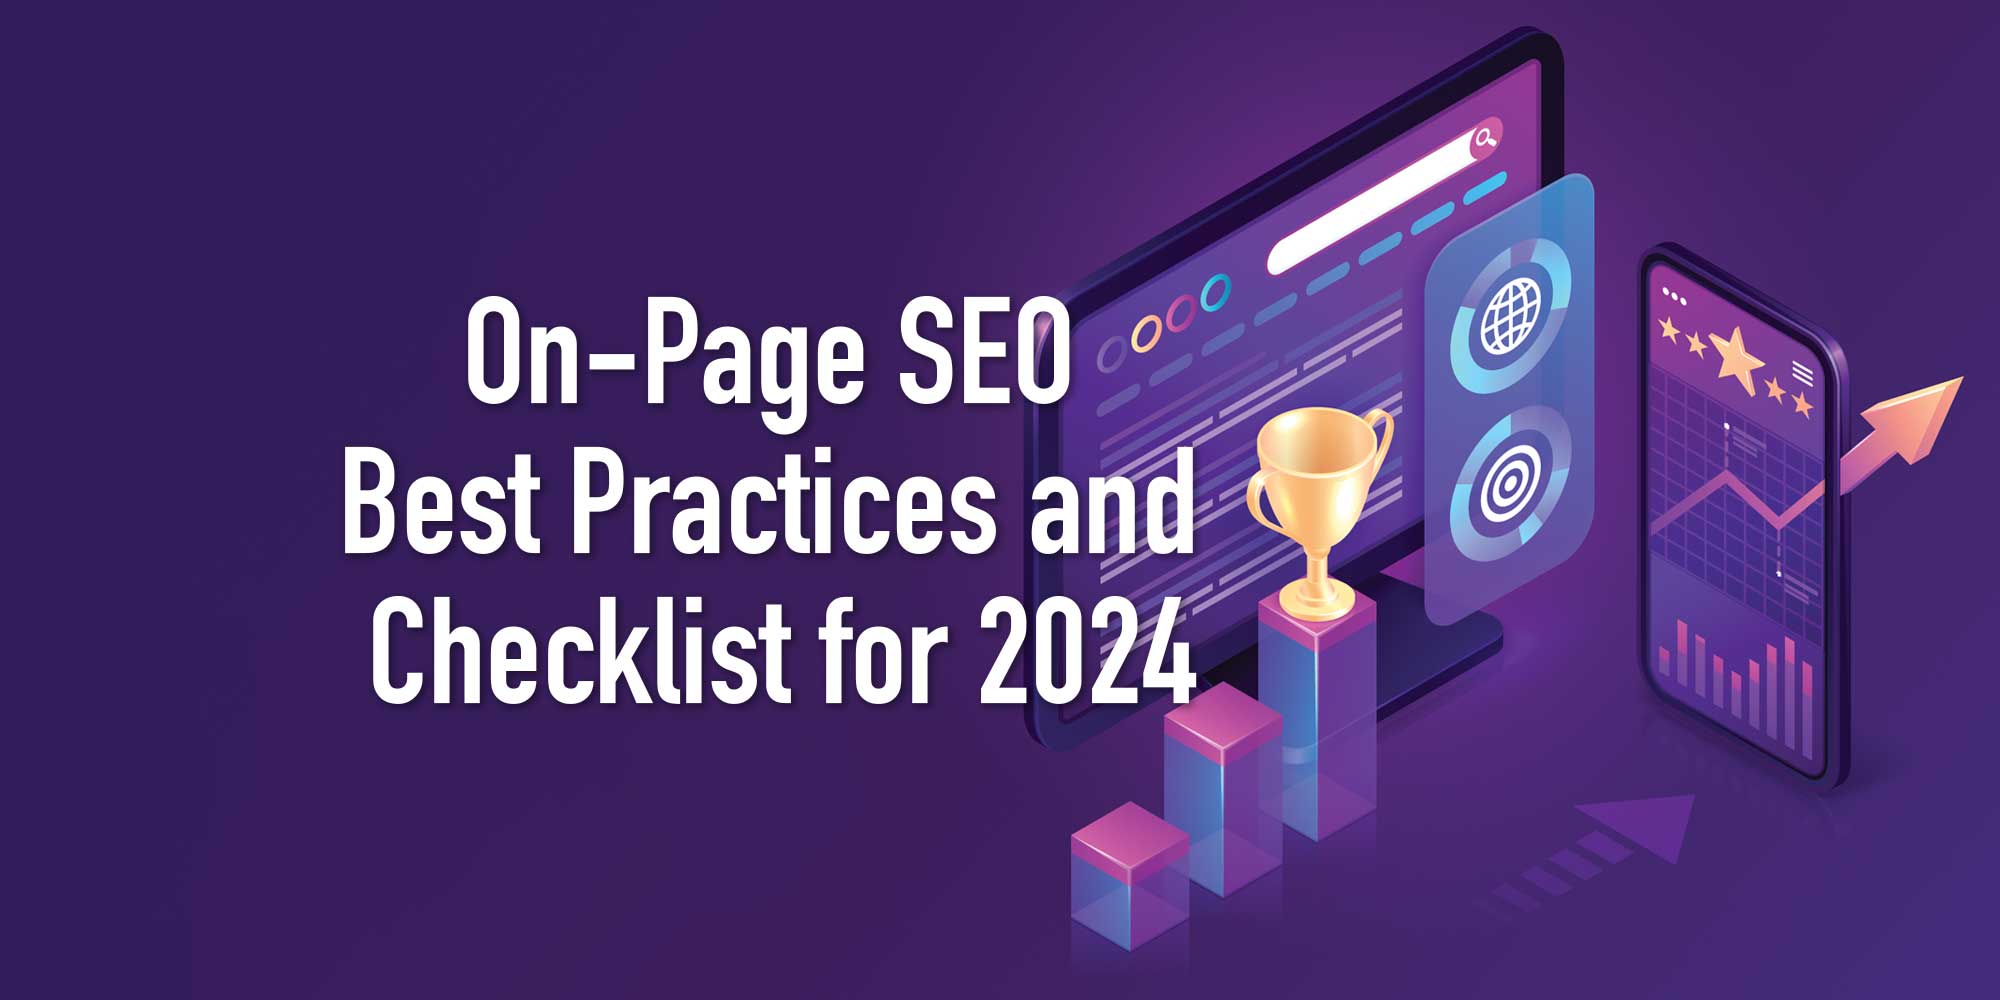 OnPage SEO Best Practices and Checklist for 2024 232 Creative